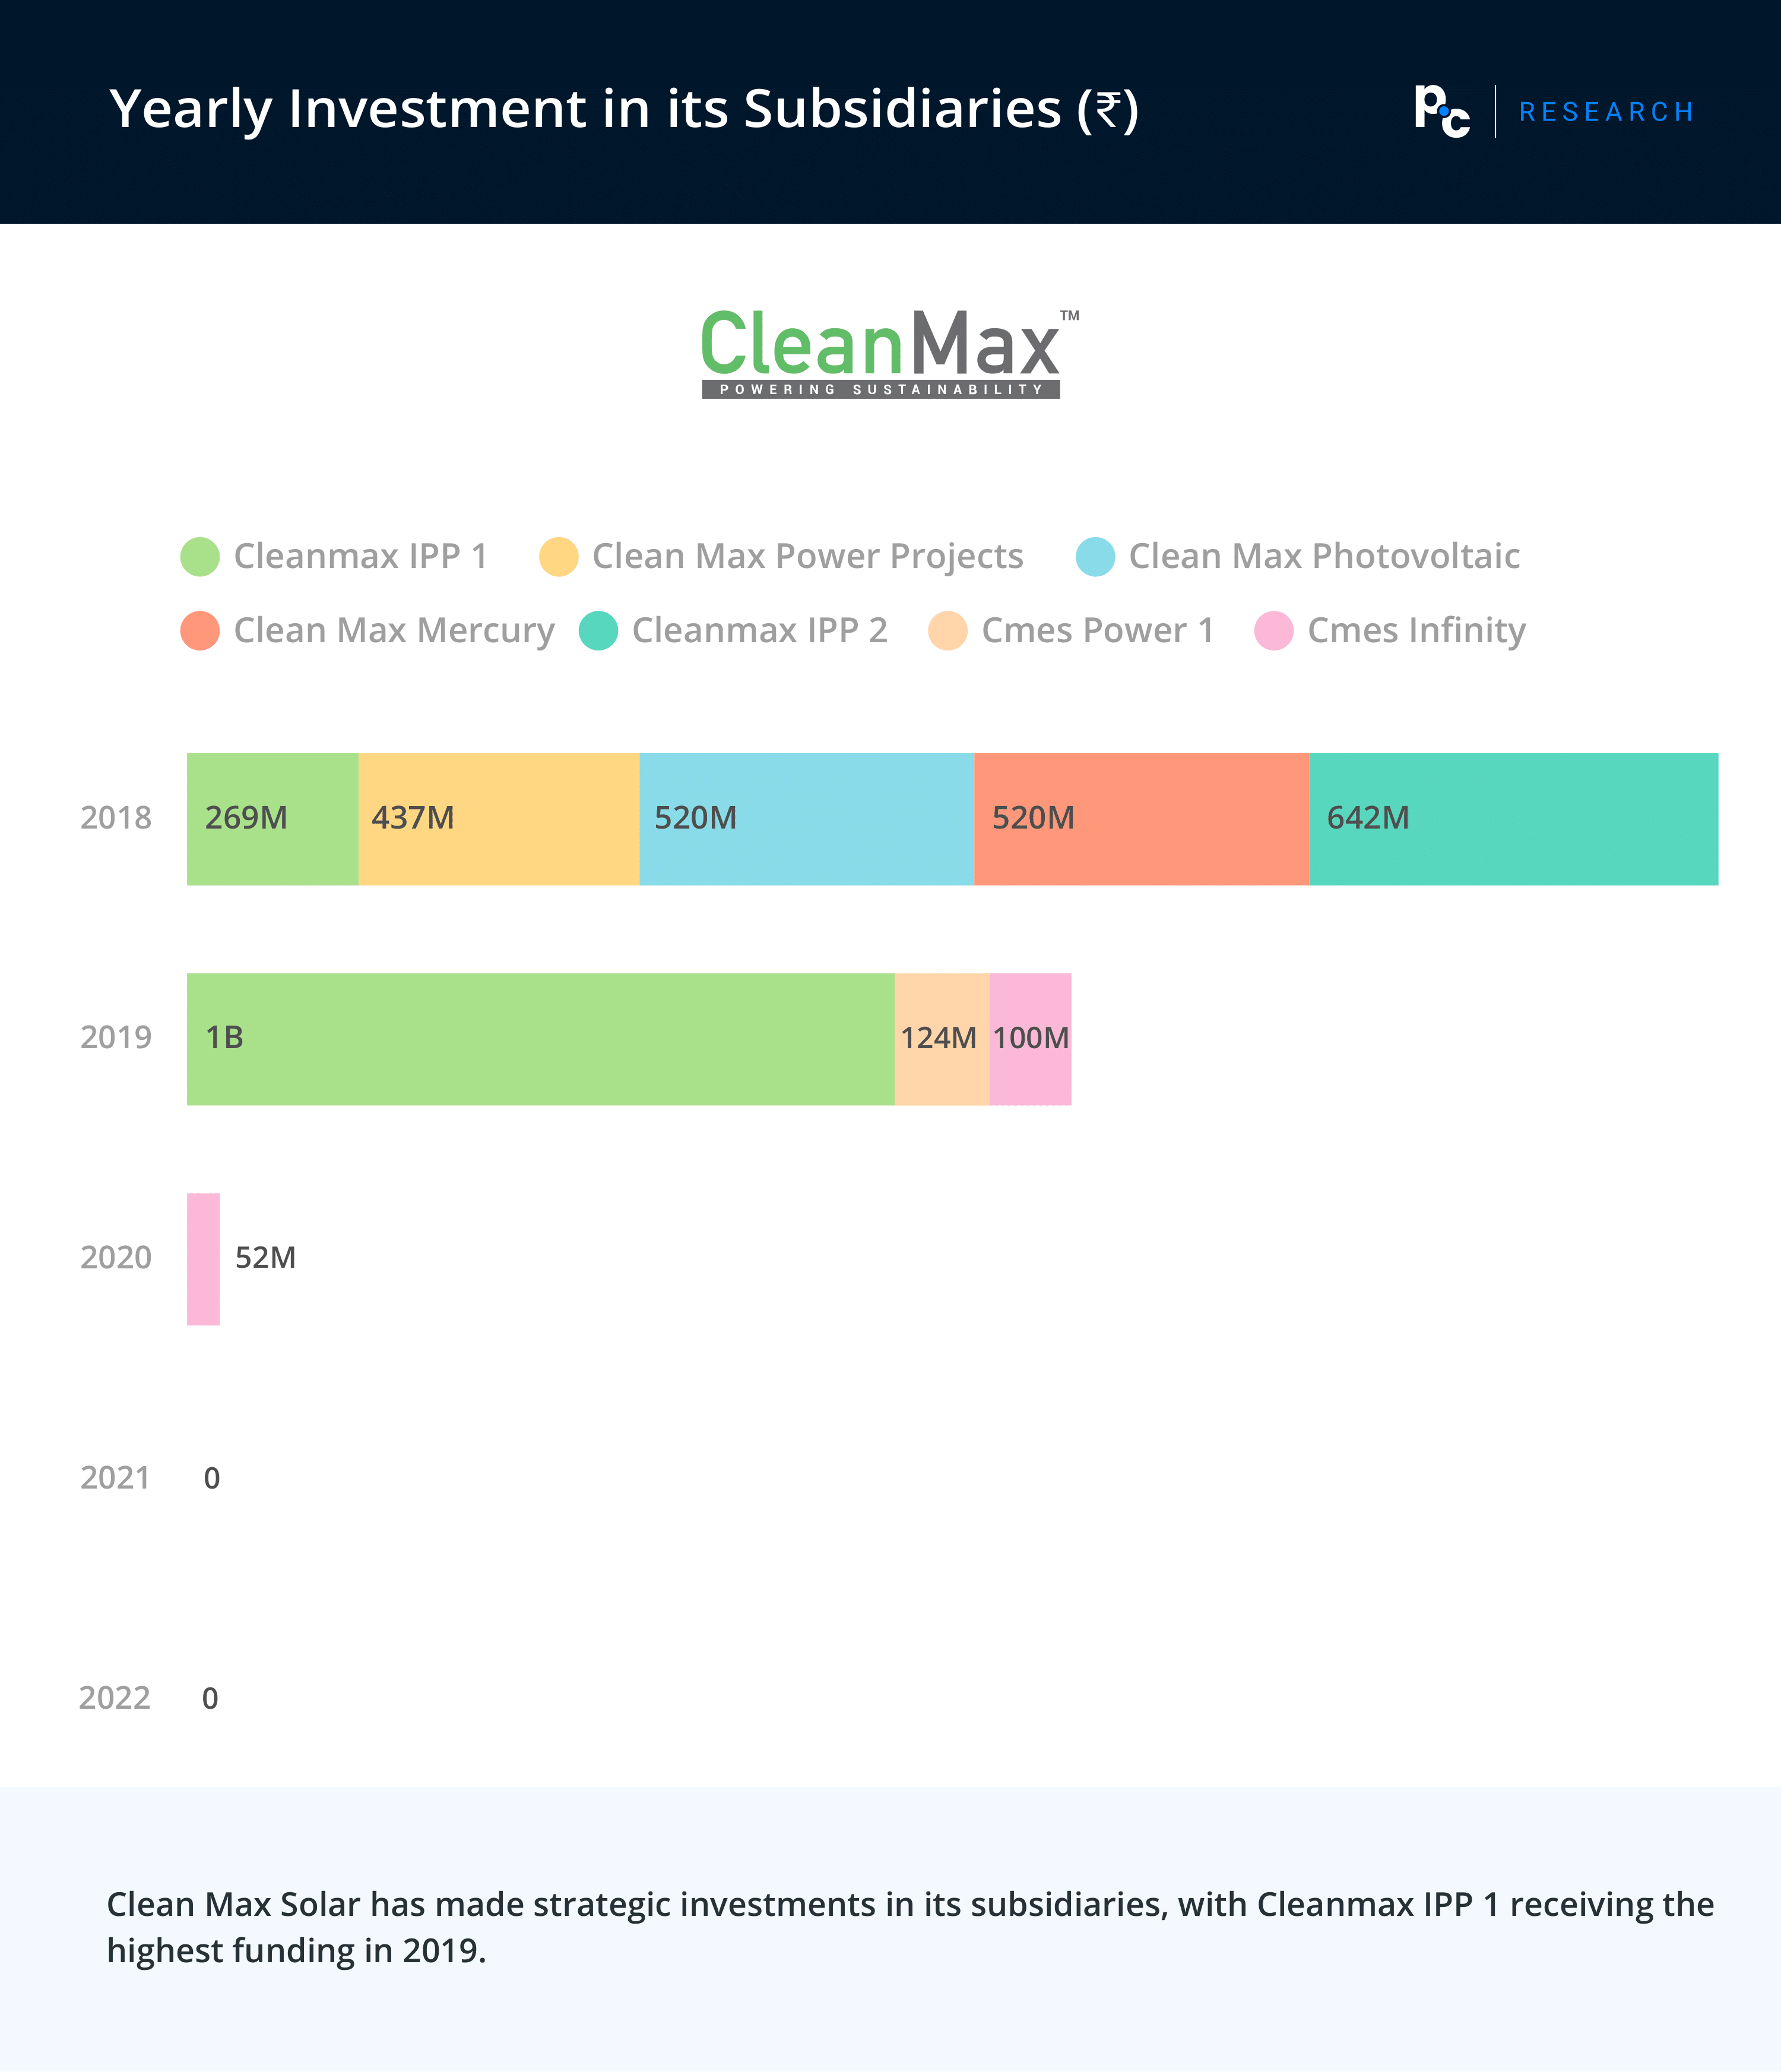 CleanMax: Yearly Investment in its Subsidiaries (₹).

Clean Max Solar has made strategic investments in its subsidiaries, with Cleanmax IPP 1 receiving the highest funding in 2019.